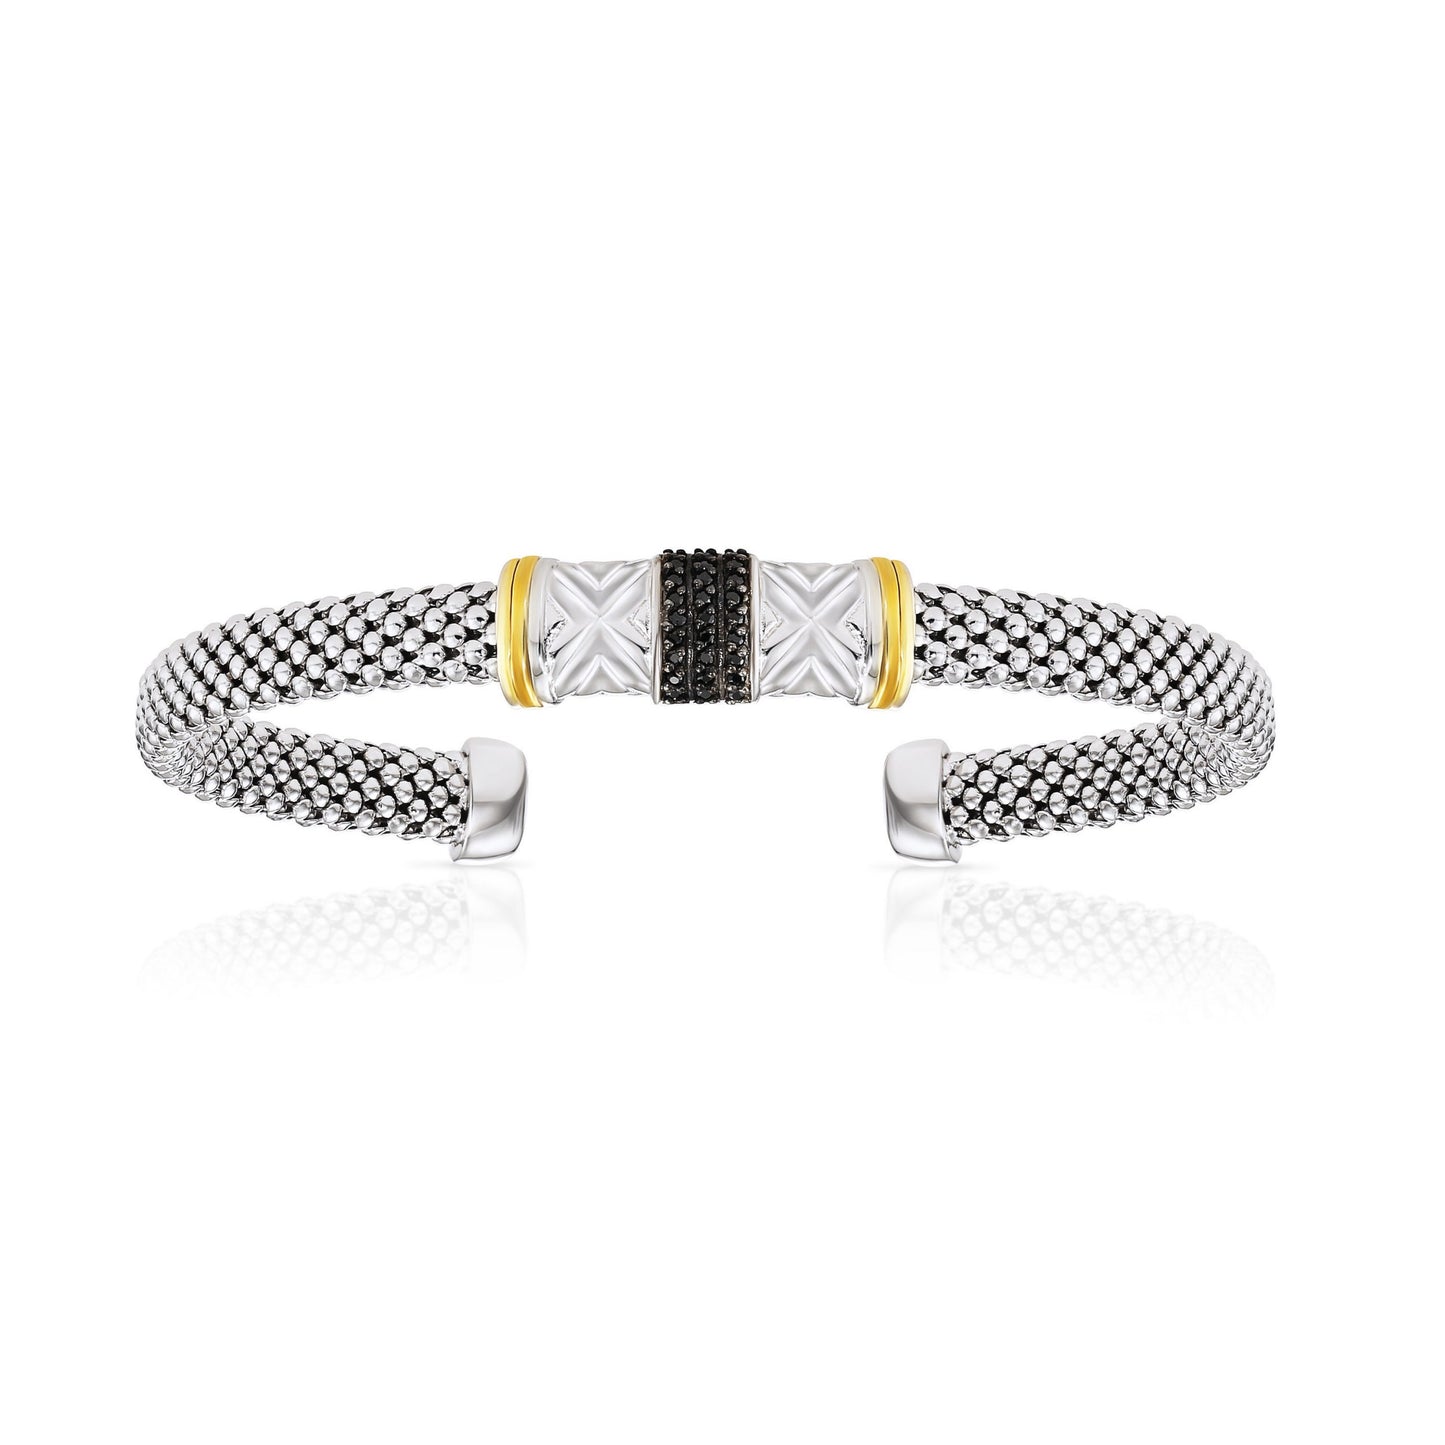 Black Stone Italian Cuff Bracelet in Sterling Silver, Slip On Bangle with Gold Accents, Fits 7 and 8 inch wrist